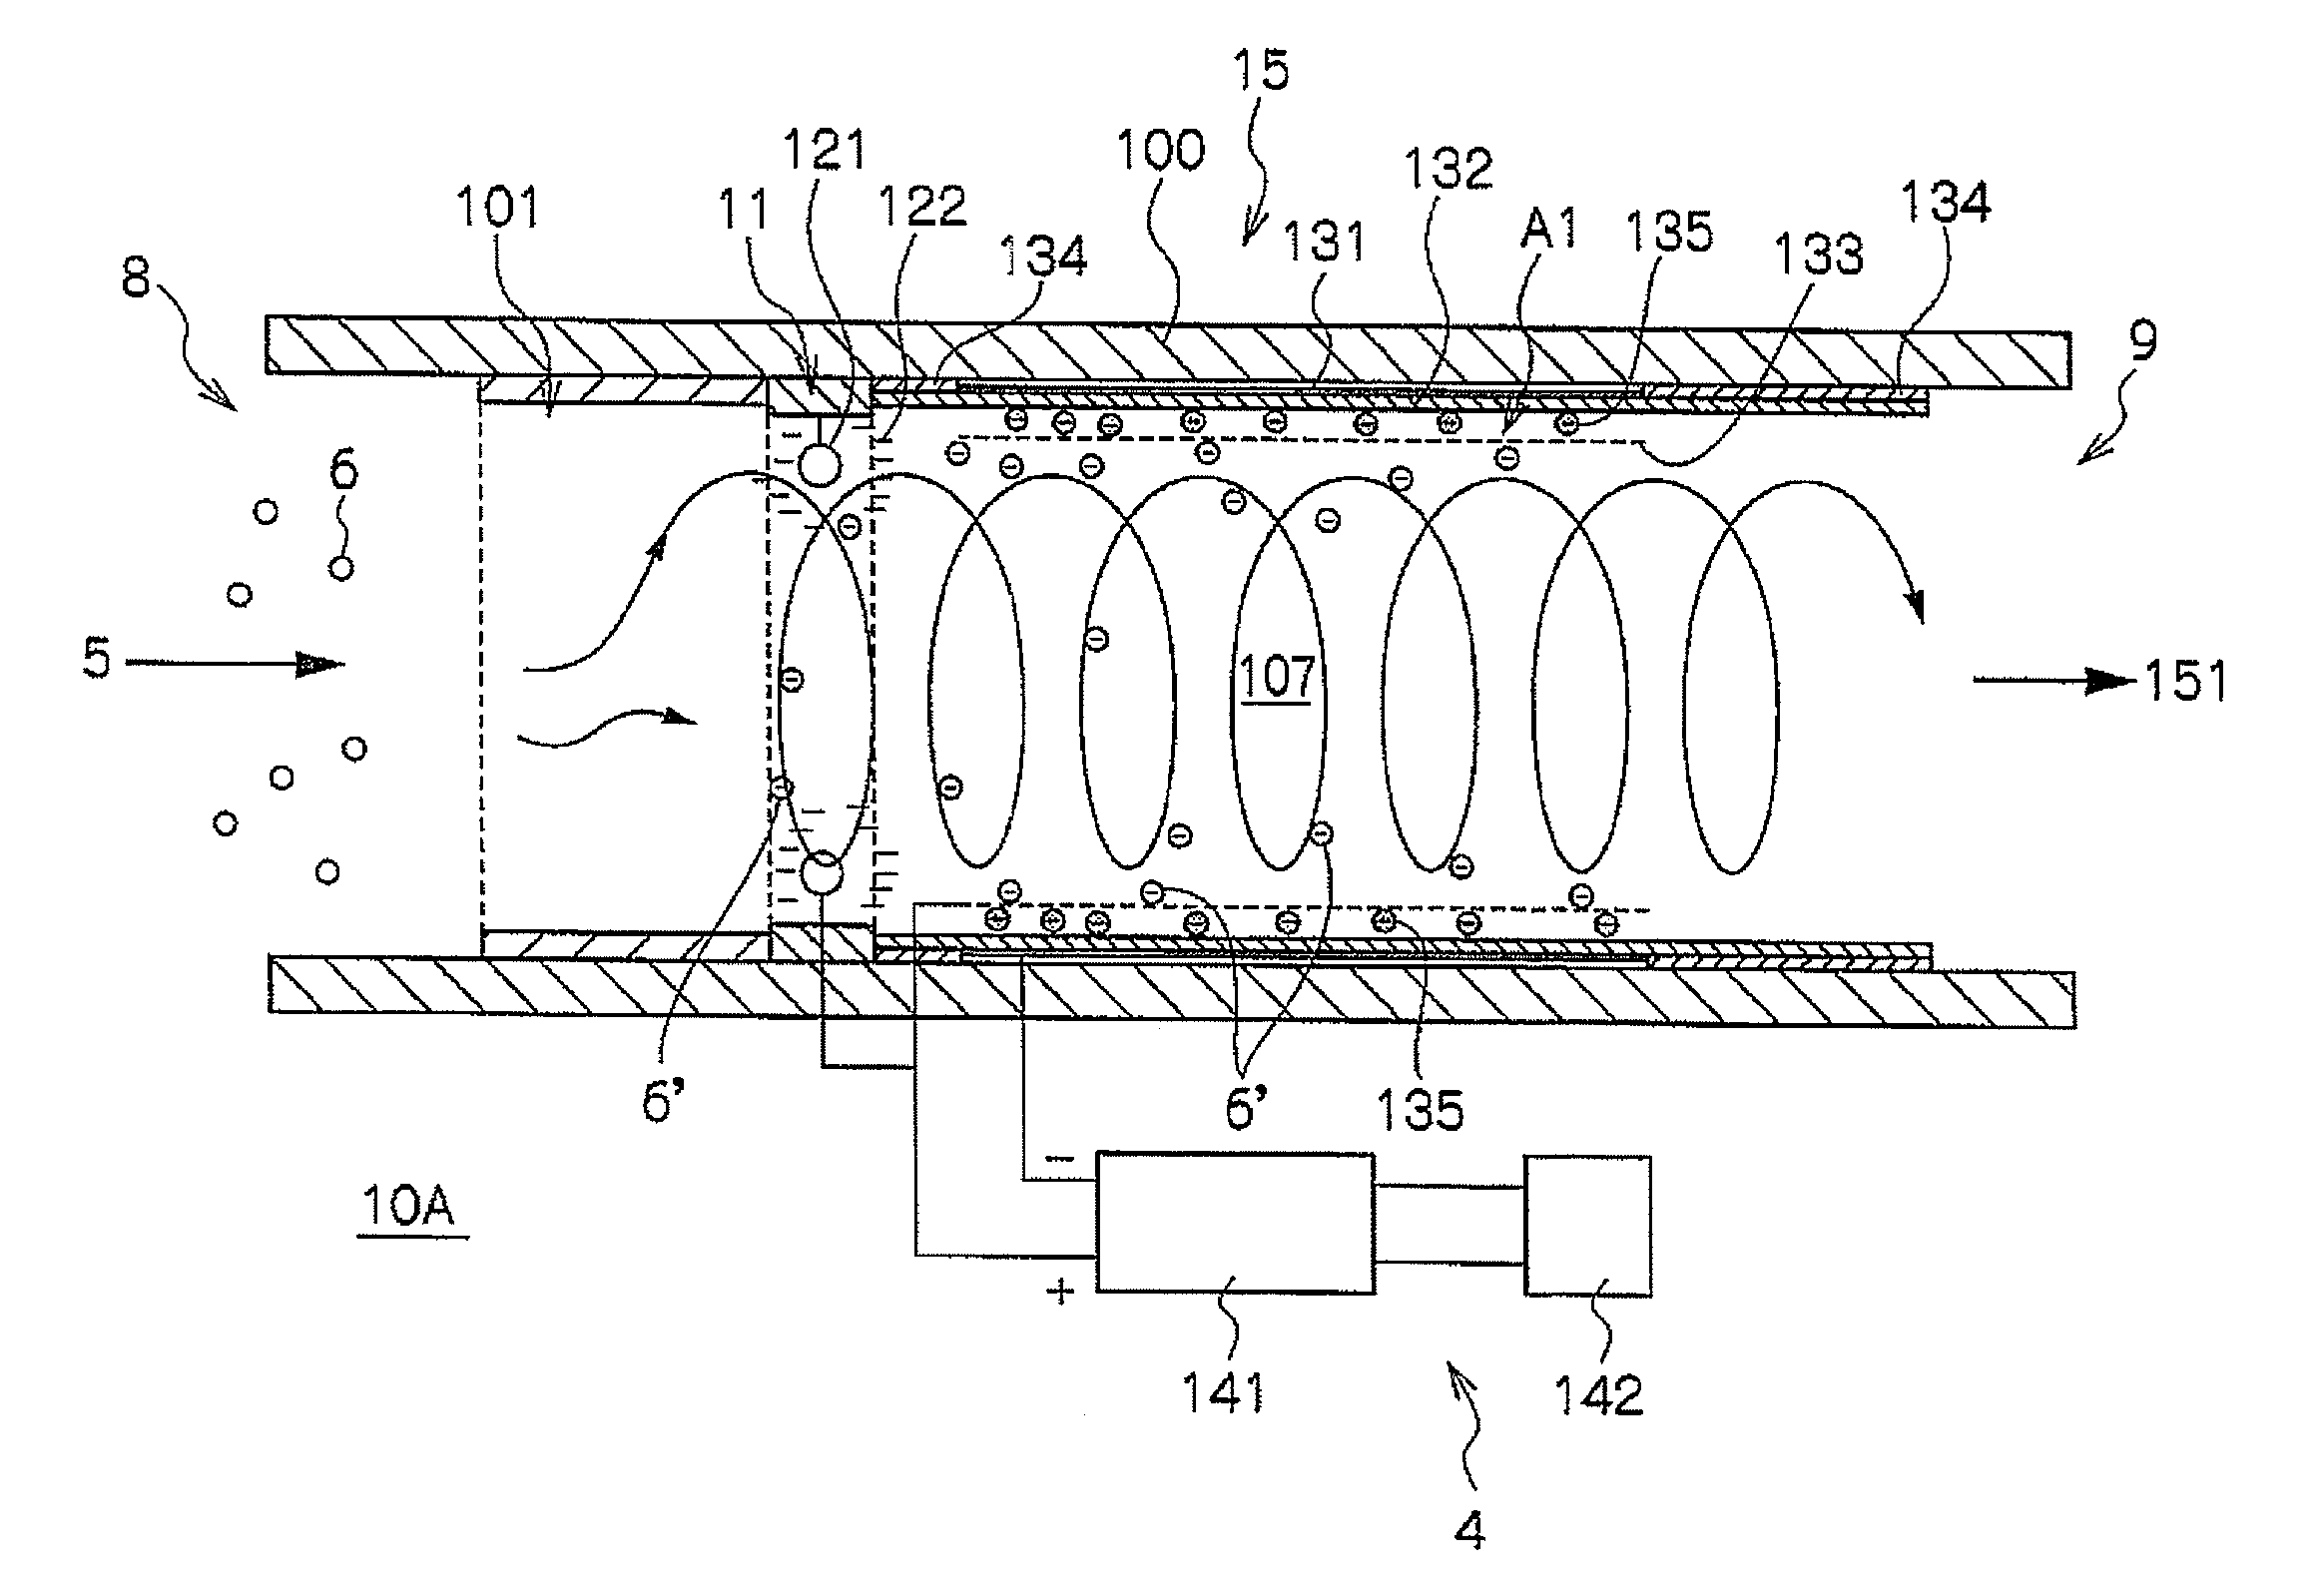 Device and method for combusting particulate substances